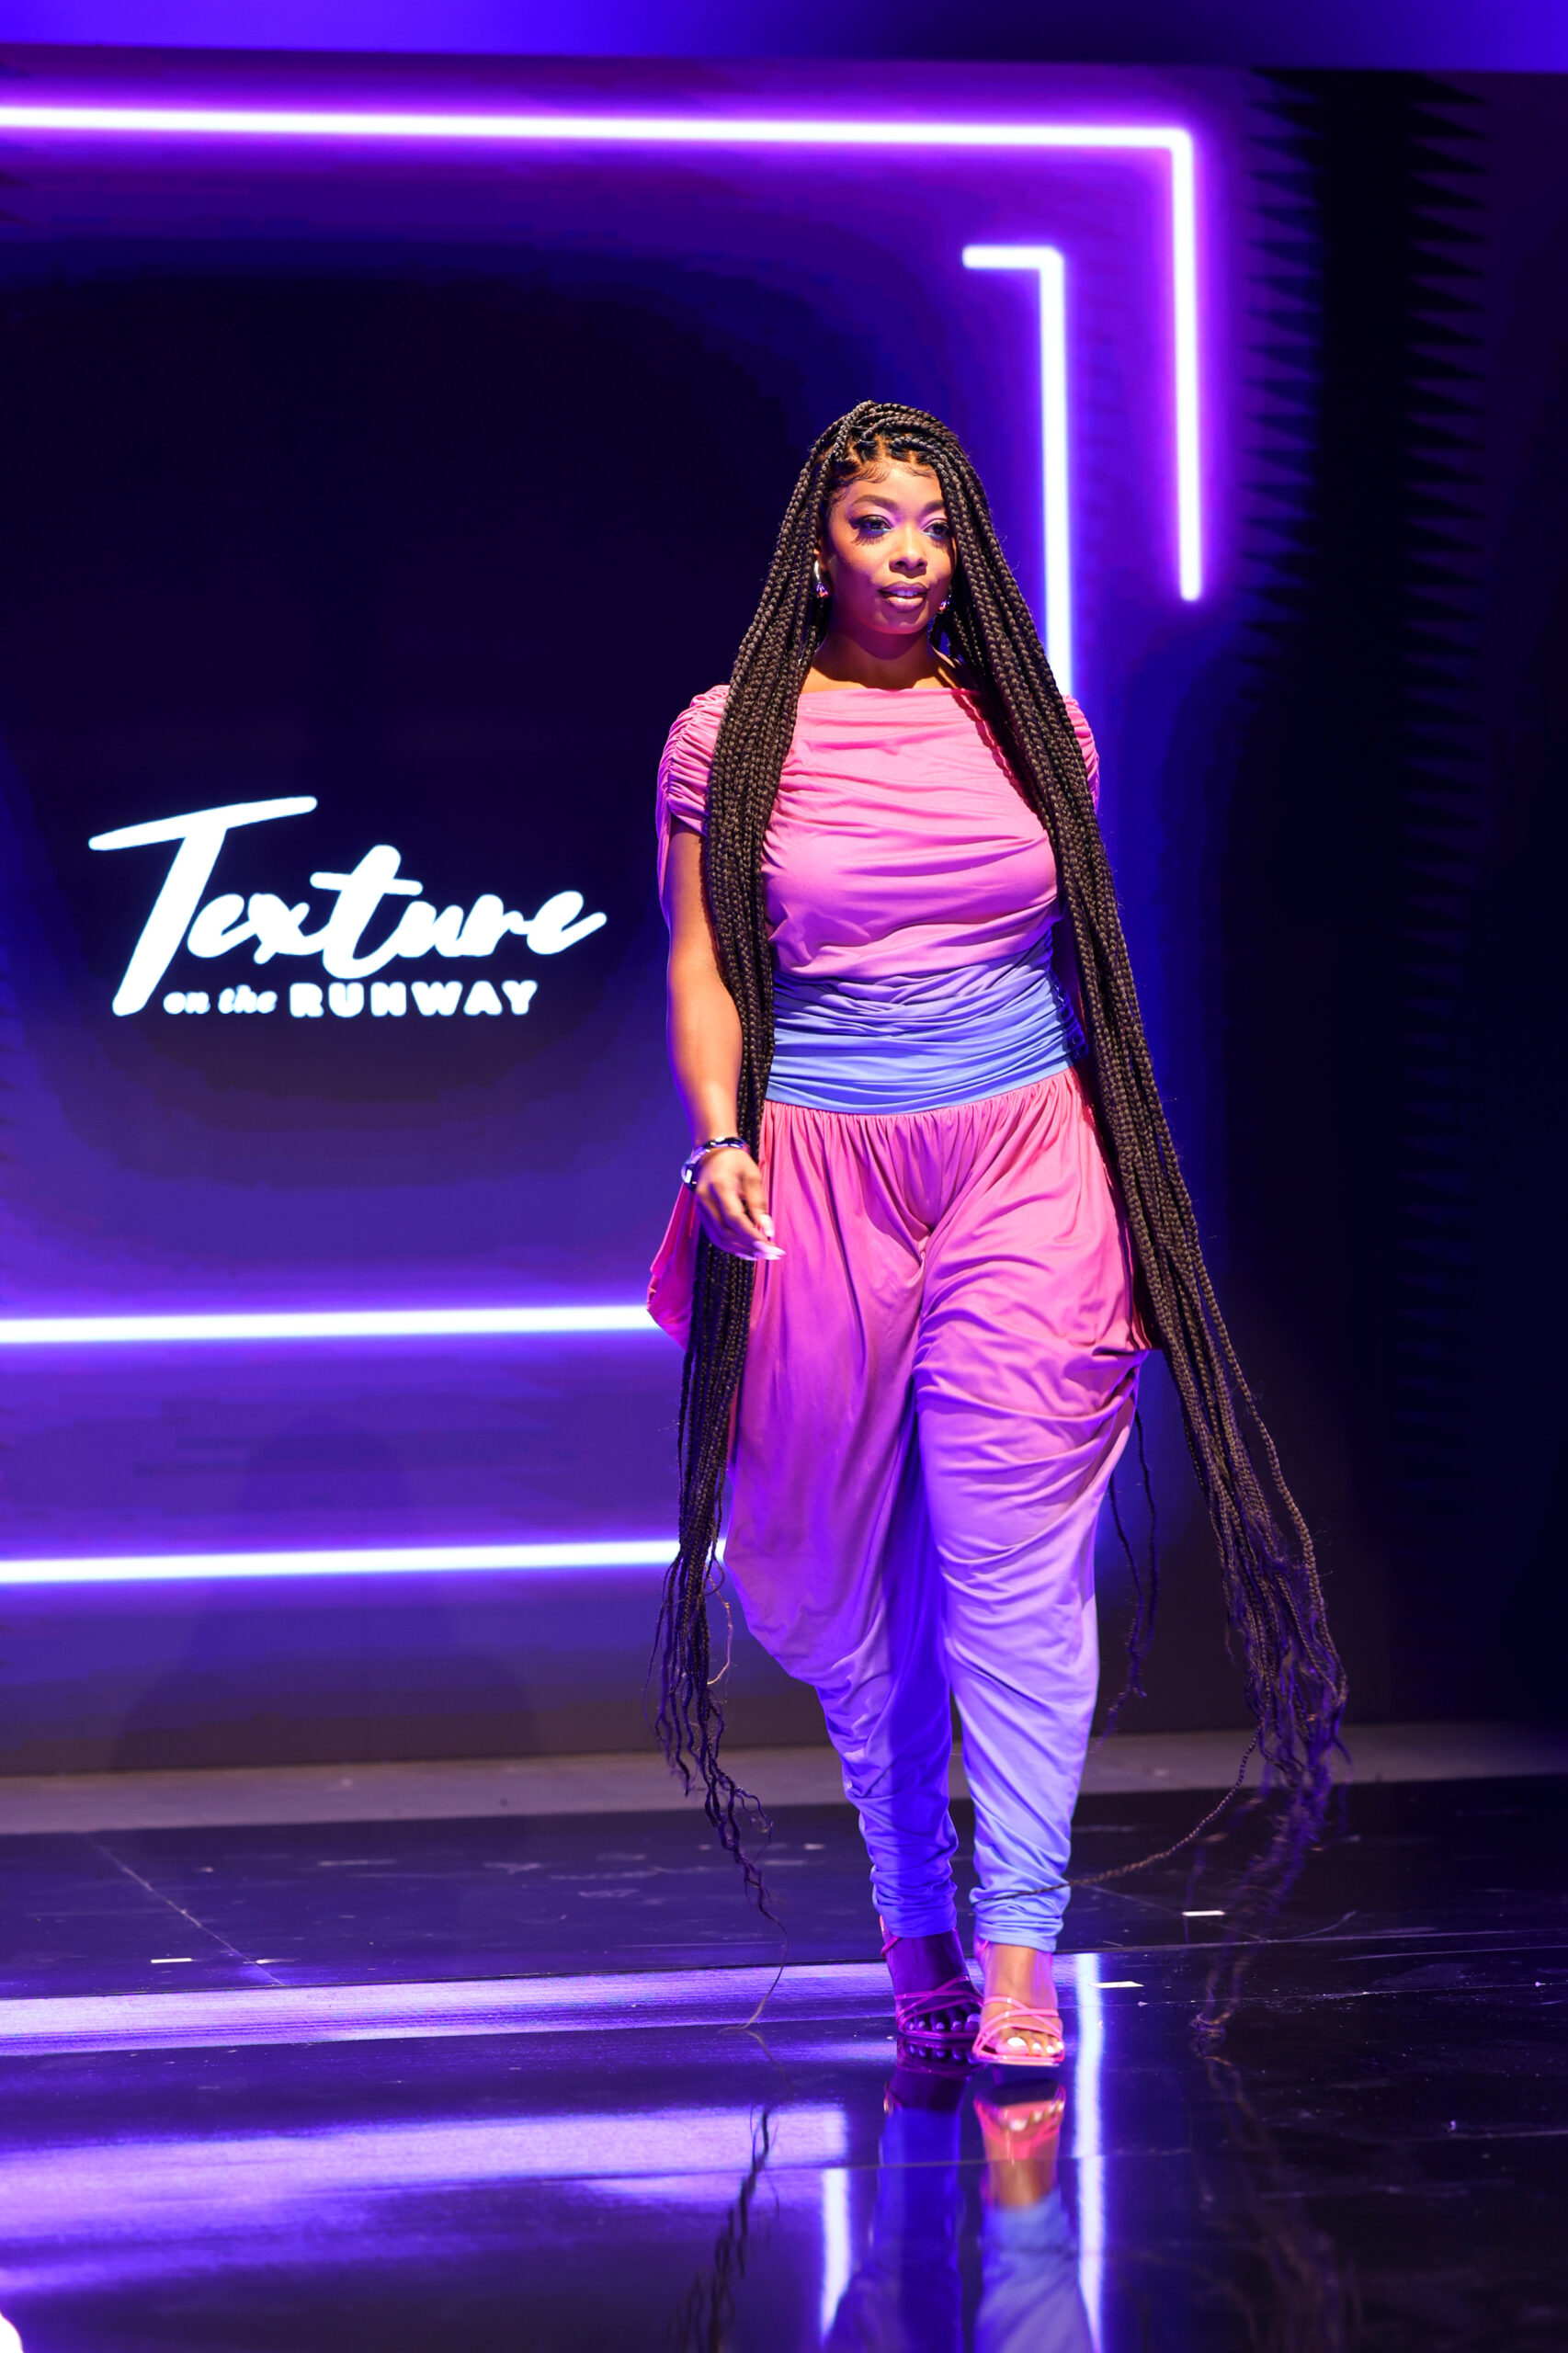 Texture on the Runway Celebrated Style And Ballroom At Beautycon